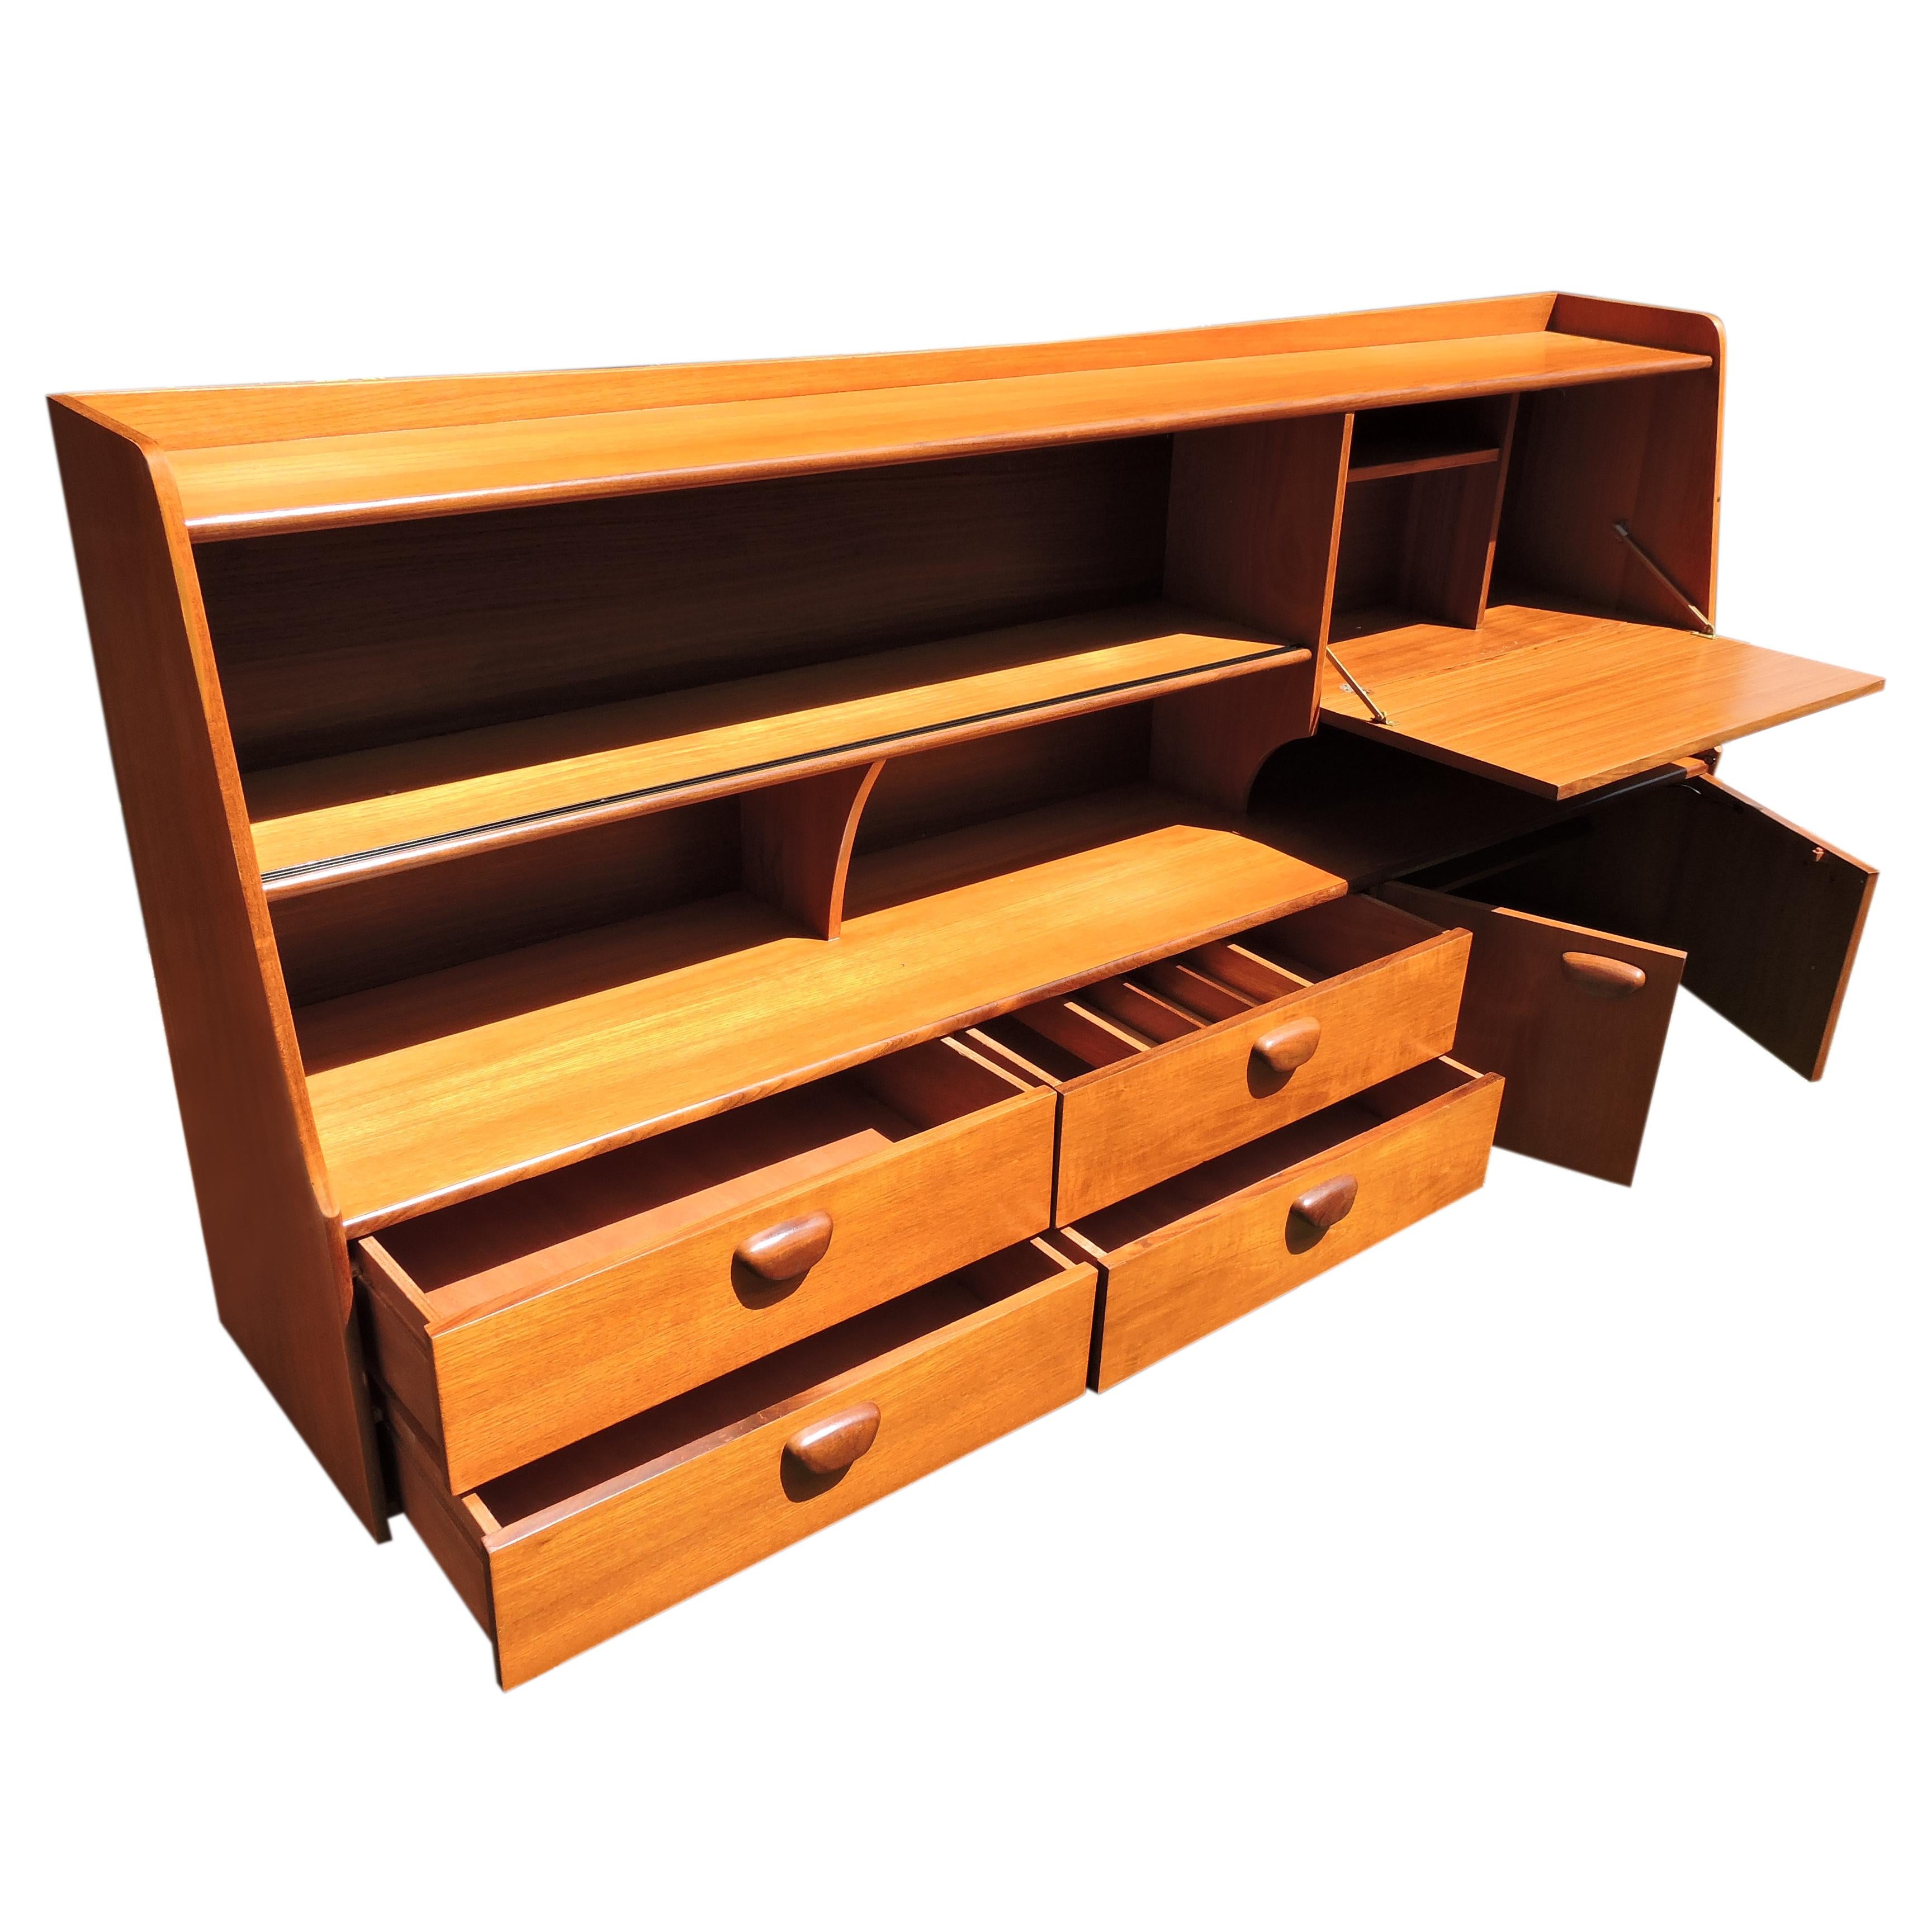 - Teak high board by British manufacturers Portwood
- Comprised of sliding glass doors above an open shelf
- Features a pull-down lockable leaf with shelving 
- Has two opening doors below with and three drawers
- Finished with teak pull handles.